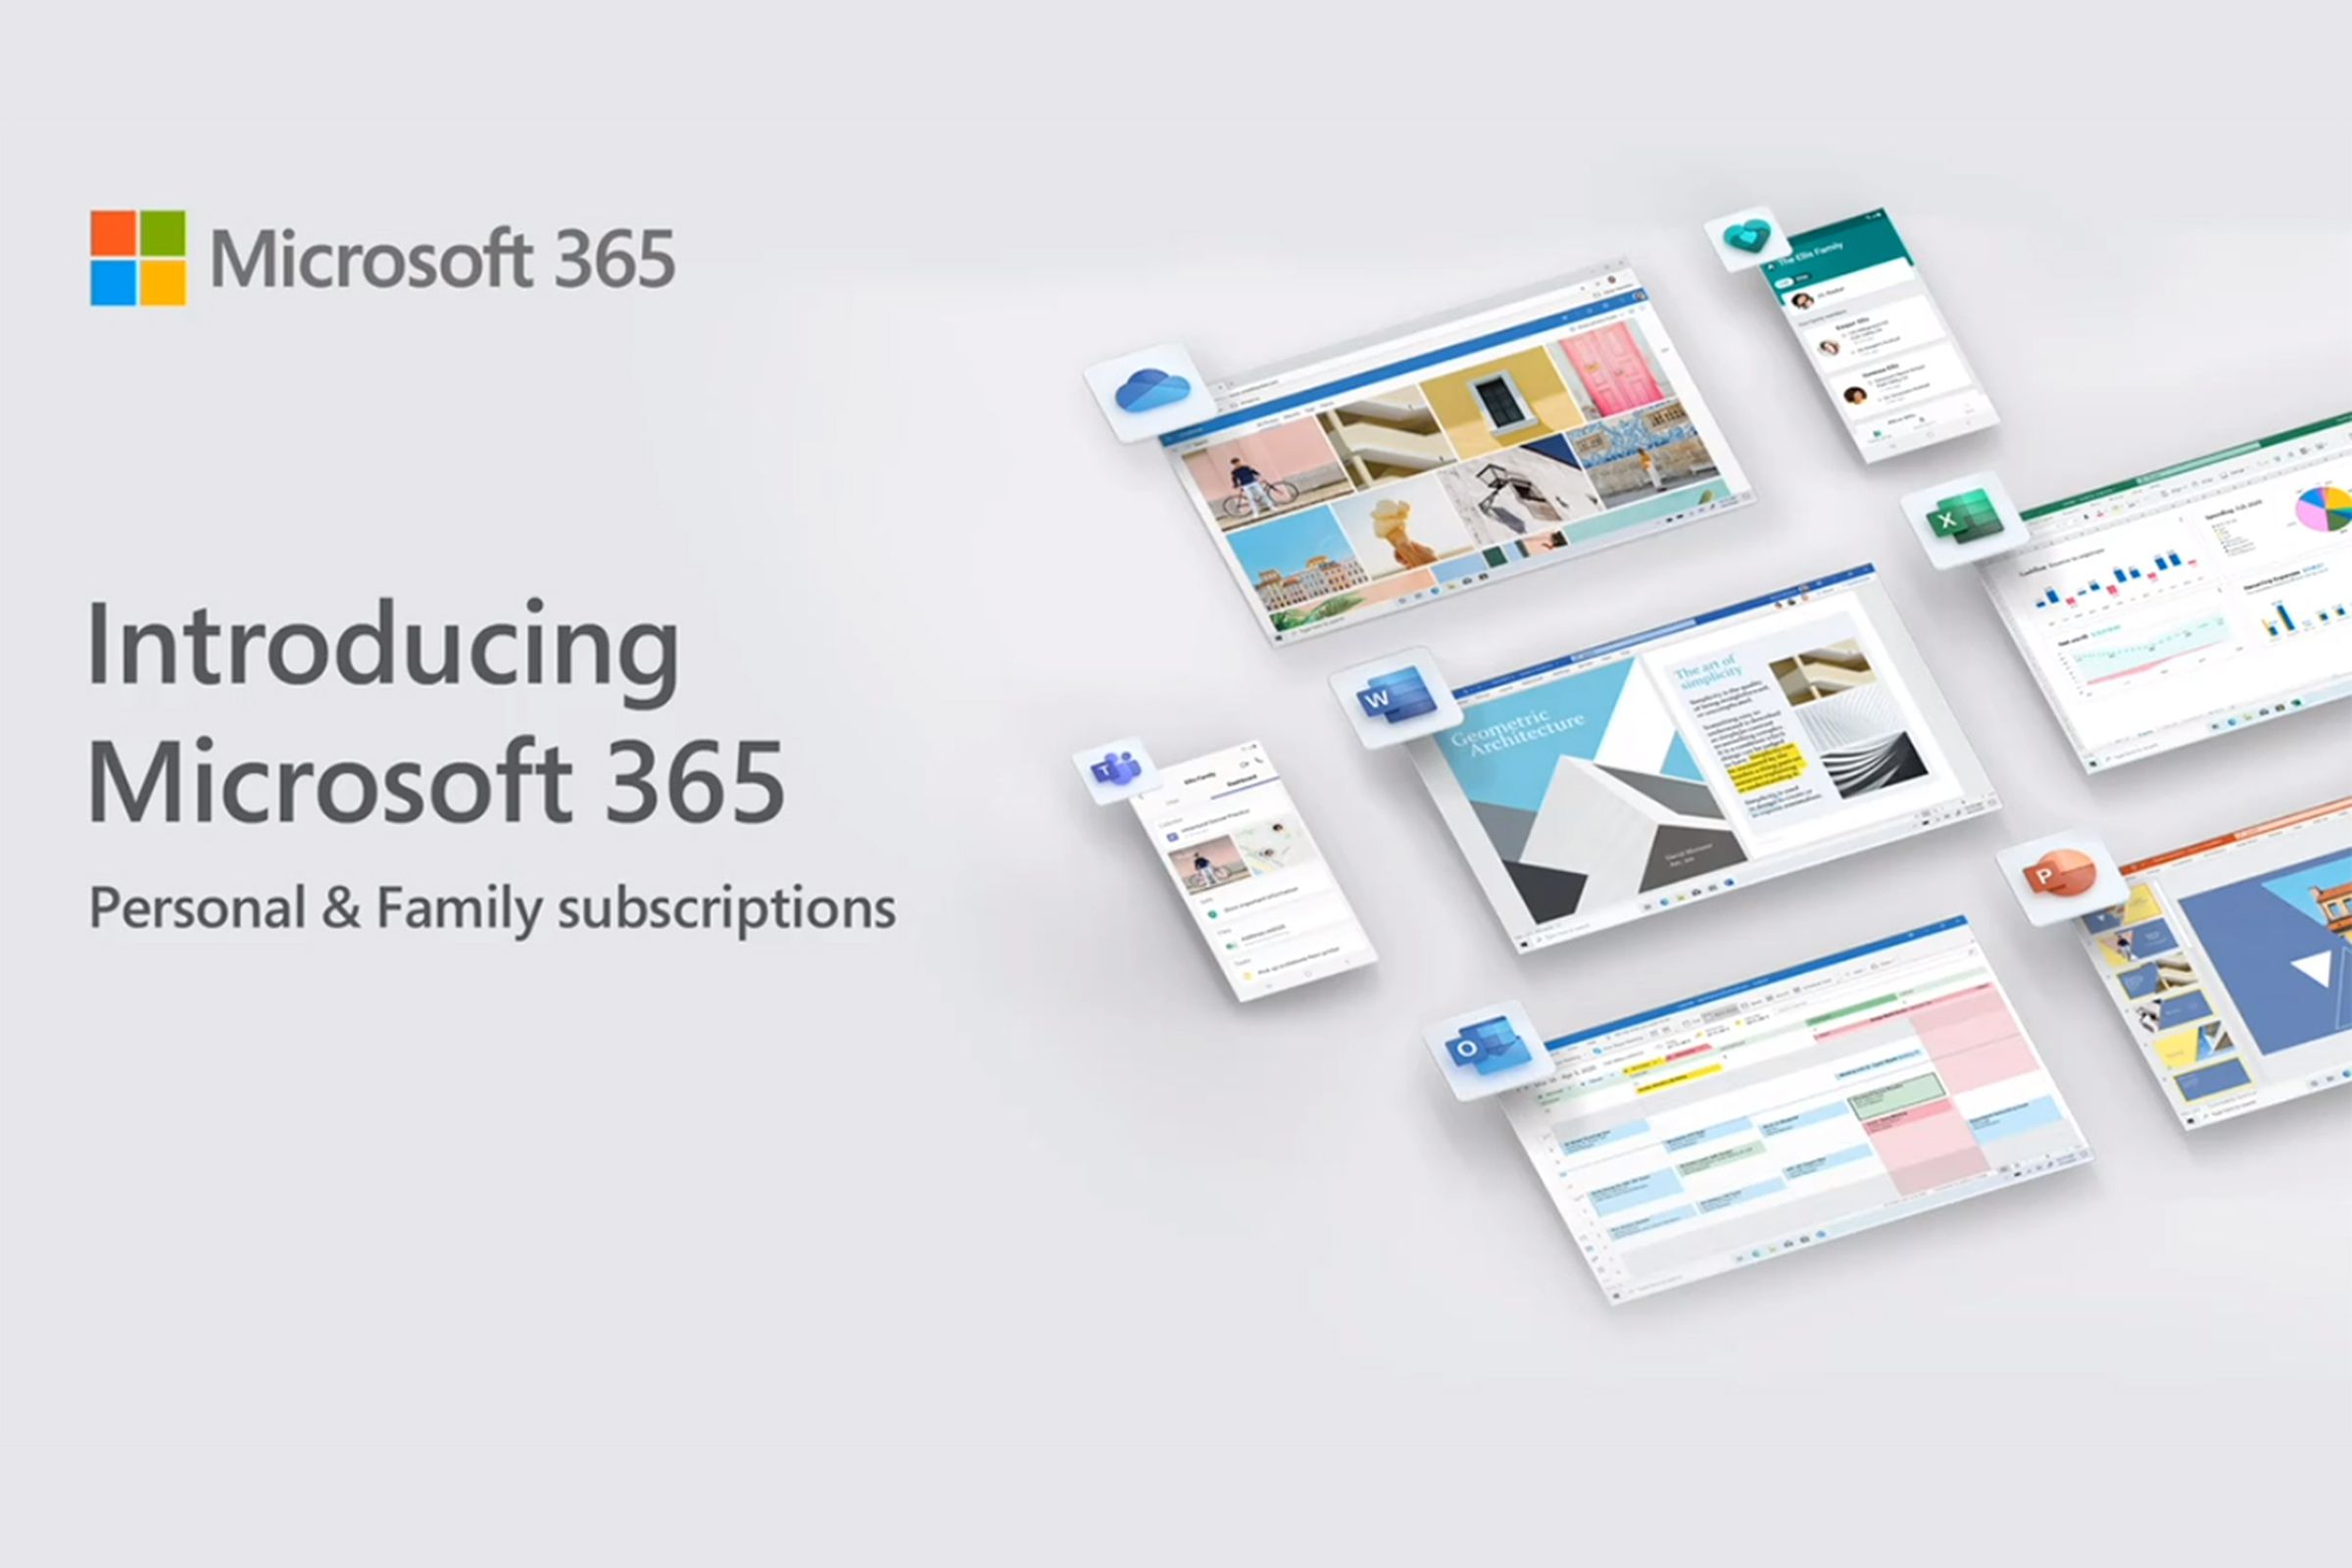 Microsoft 365 for consumers has grown.